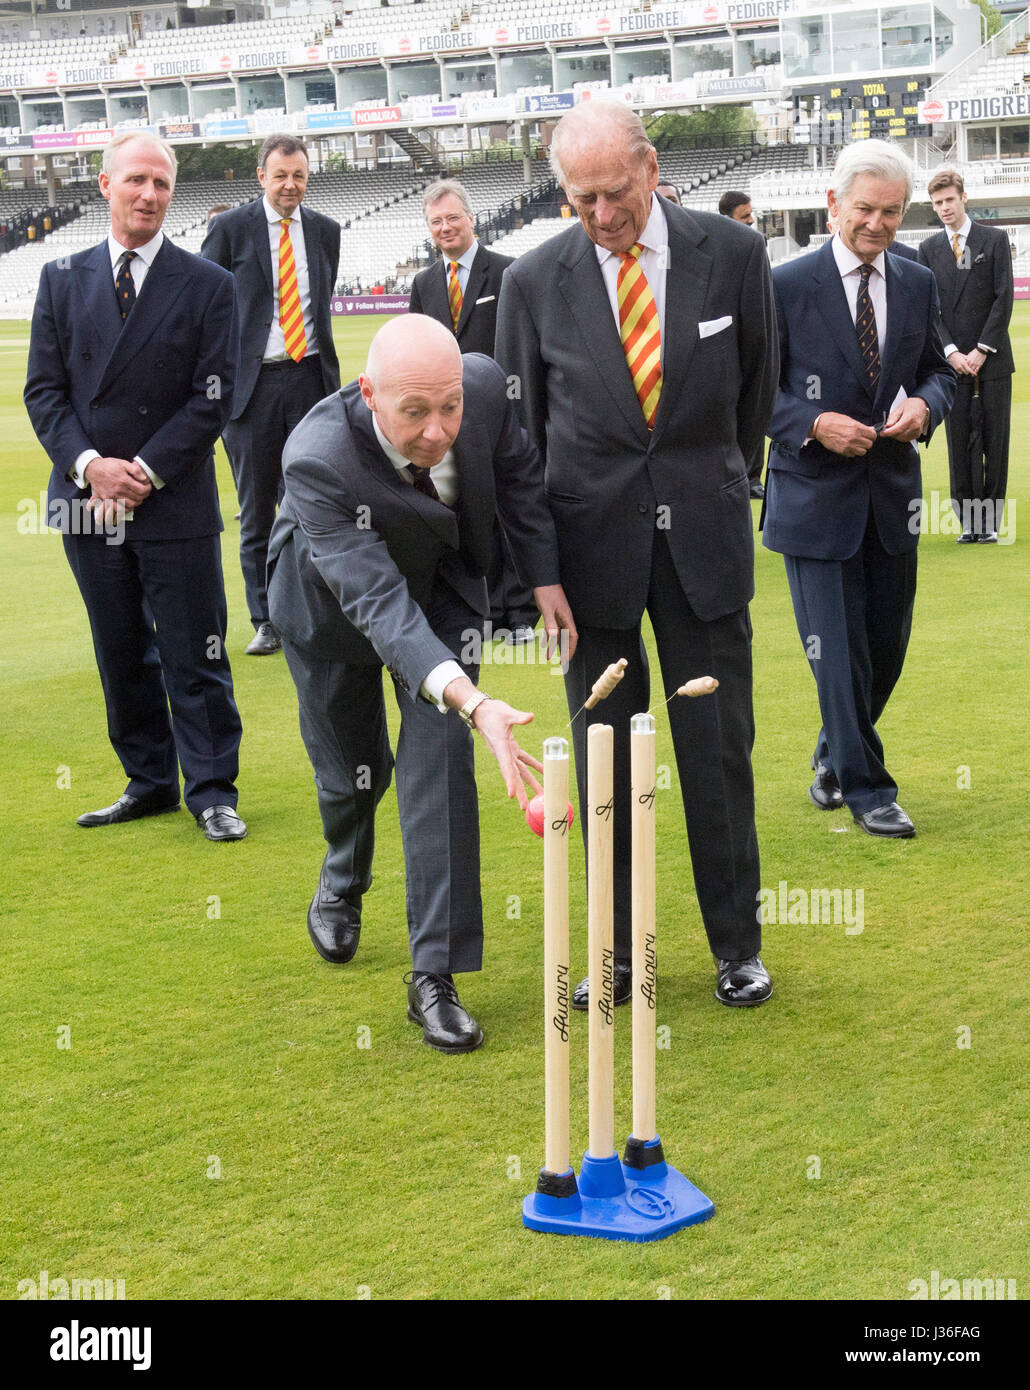 The Duke of Edinburgh (second right) watches as Marylebone Cricket Club's Laws of Cricket Manager Fraser Stewart (right) bowls towards self retracting bails at Lord's Cricket Ground in London. Stock Photo